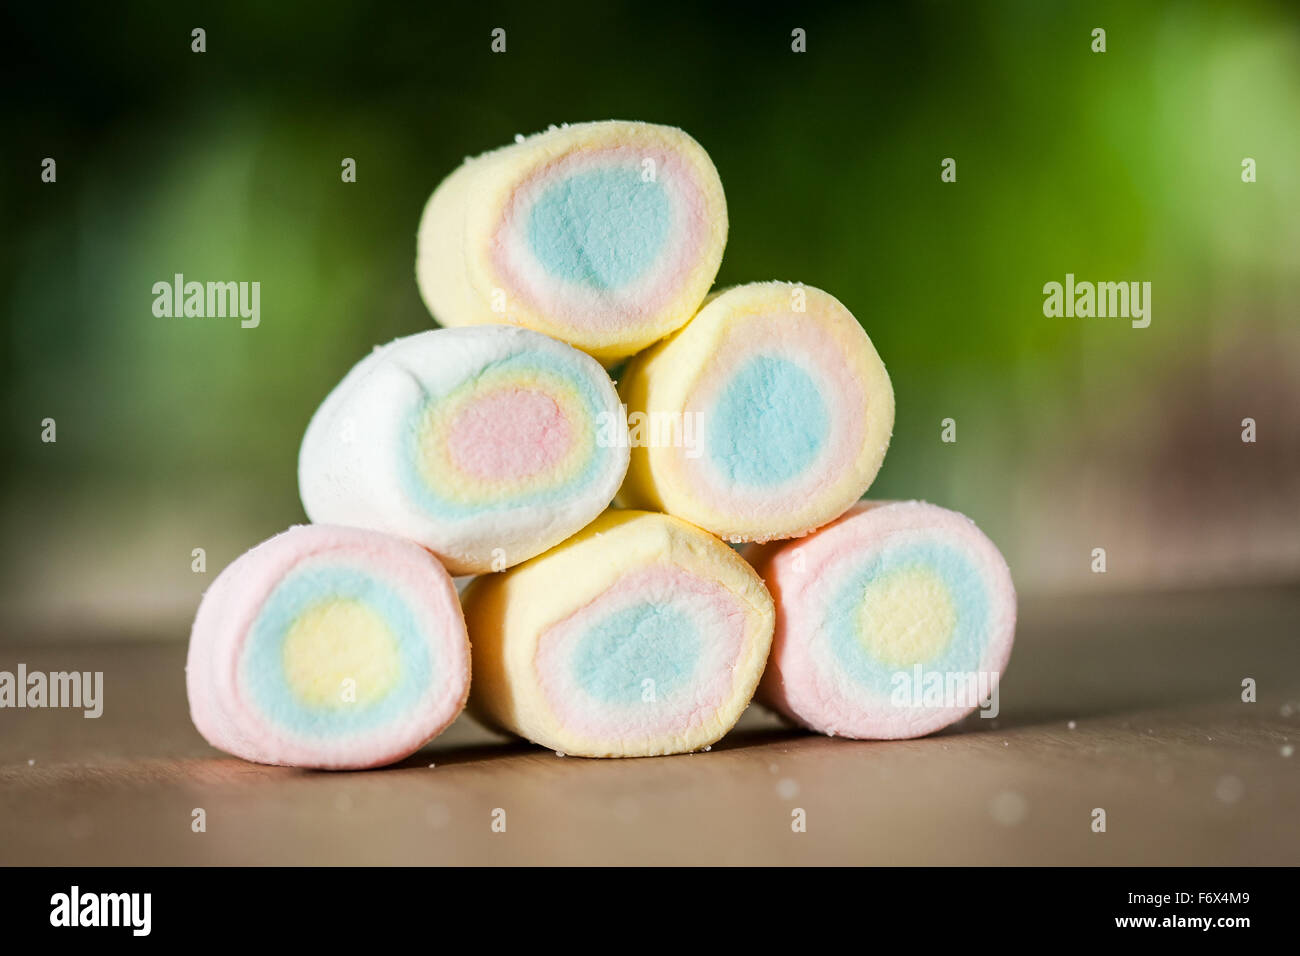 marshmallow in natural light and background blur effect green leaves Stock Photo